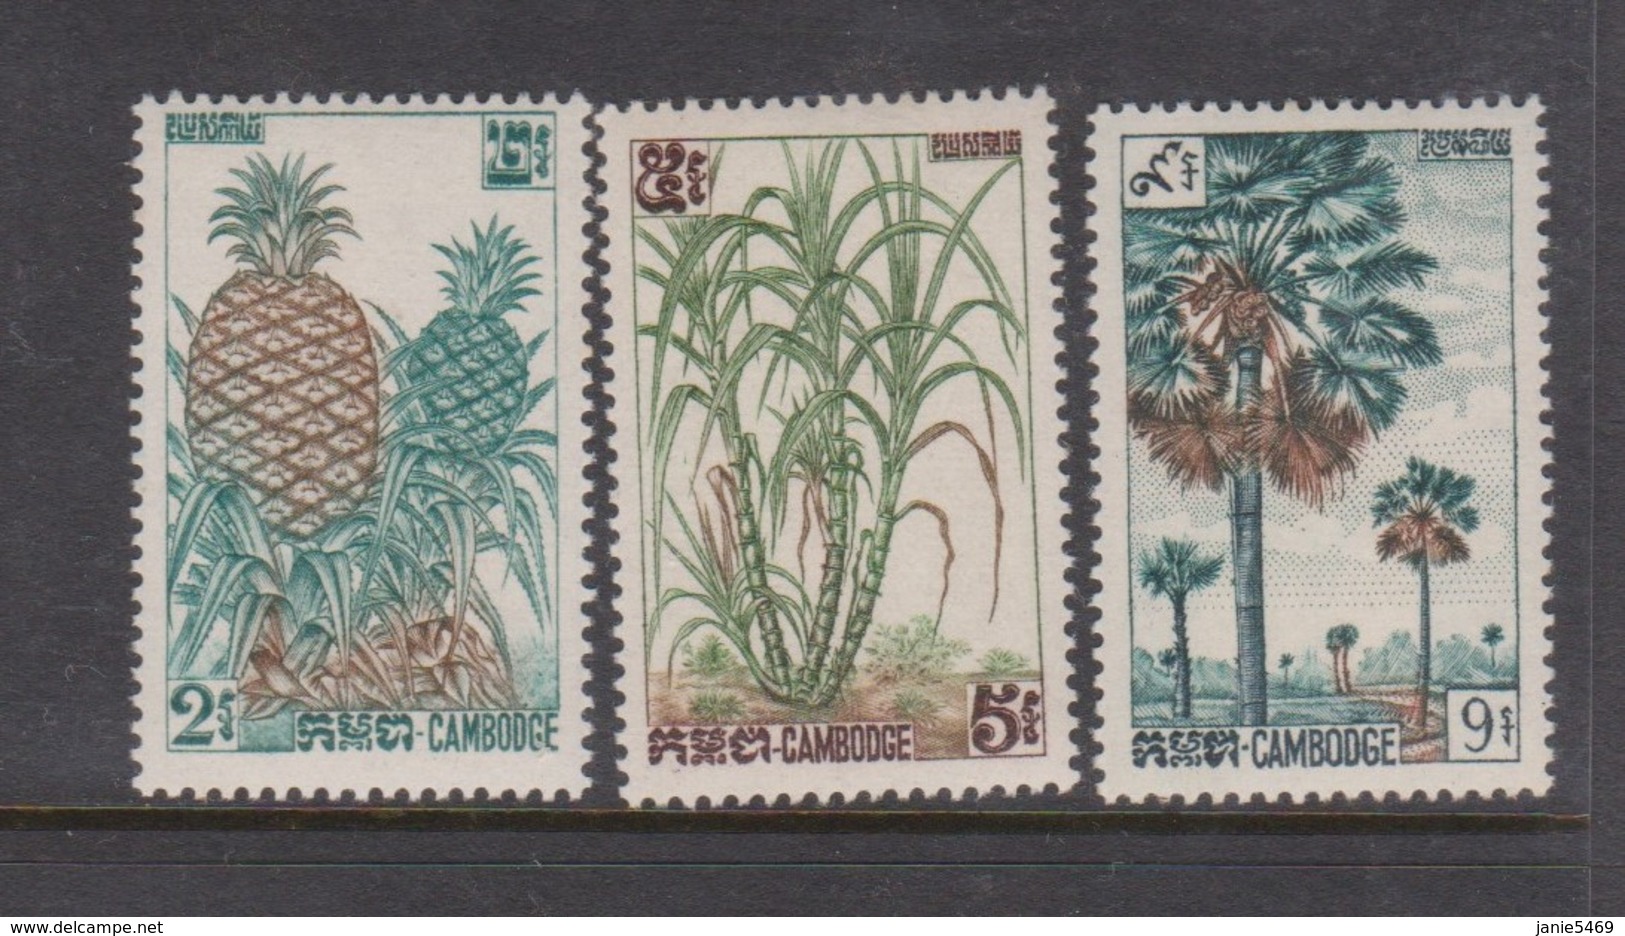 Cambodia SG 139-141 1962 Fruits 2nd Issue ,mint Never Hinged - Cambodia